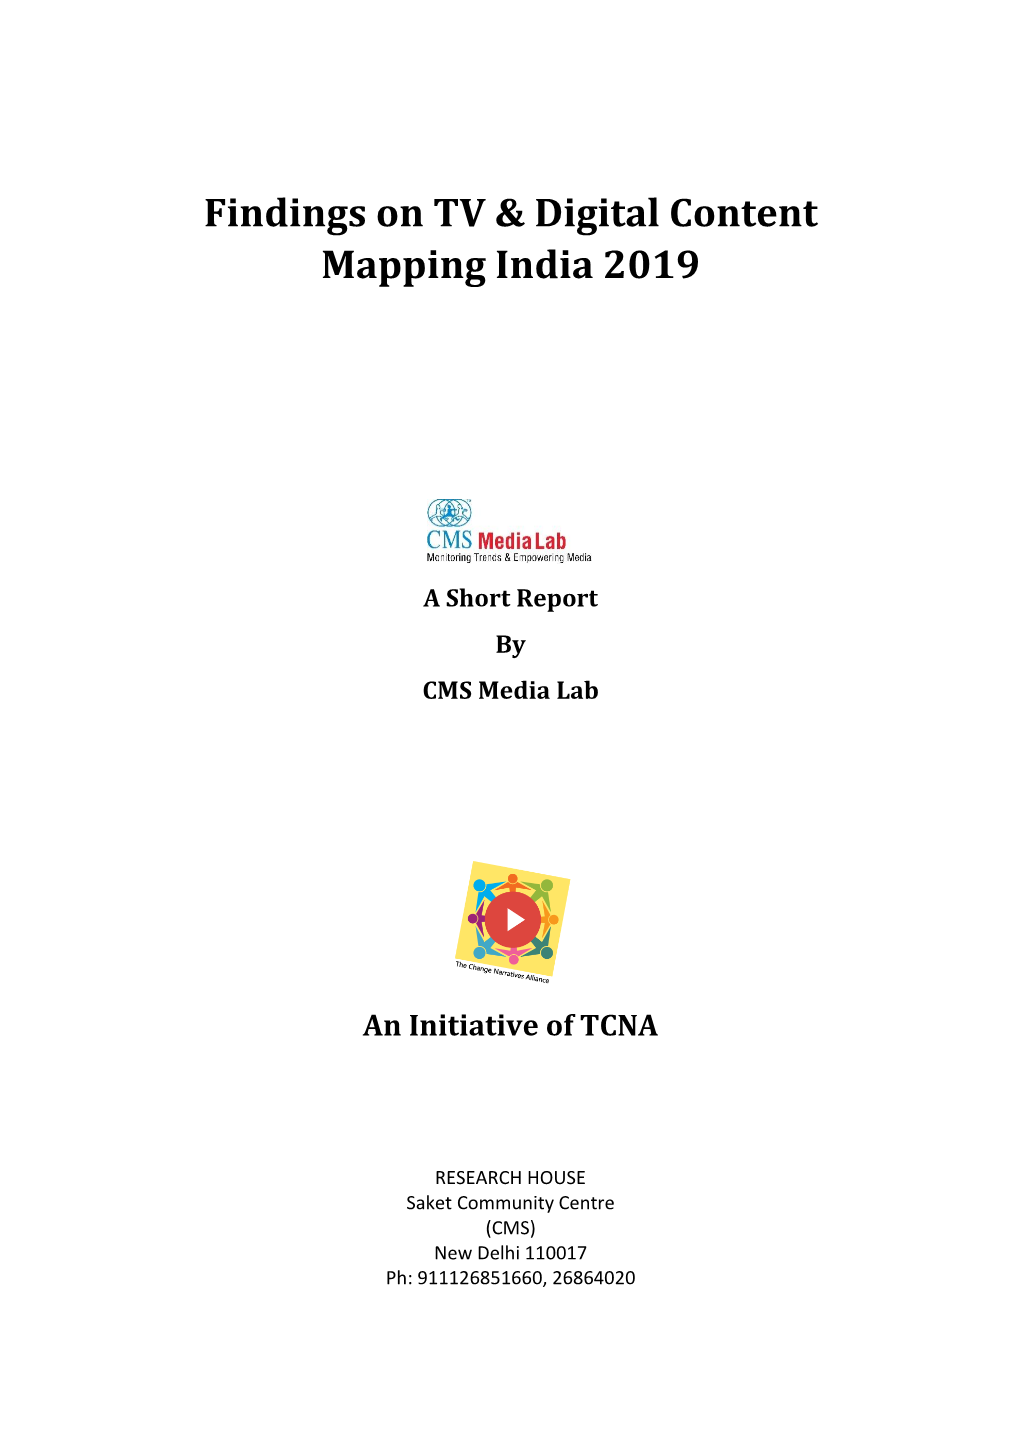 Findings on TV & Digital Content Mapping India 2019